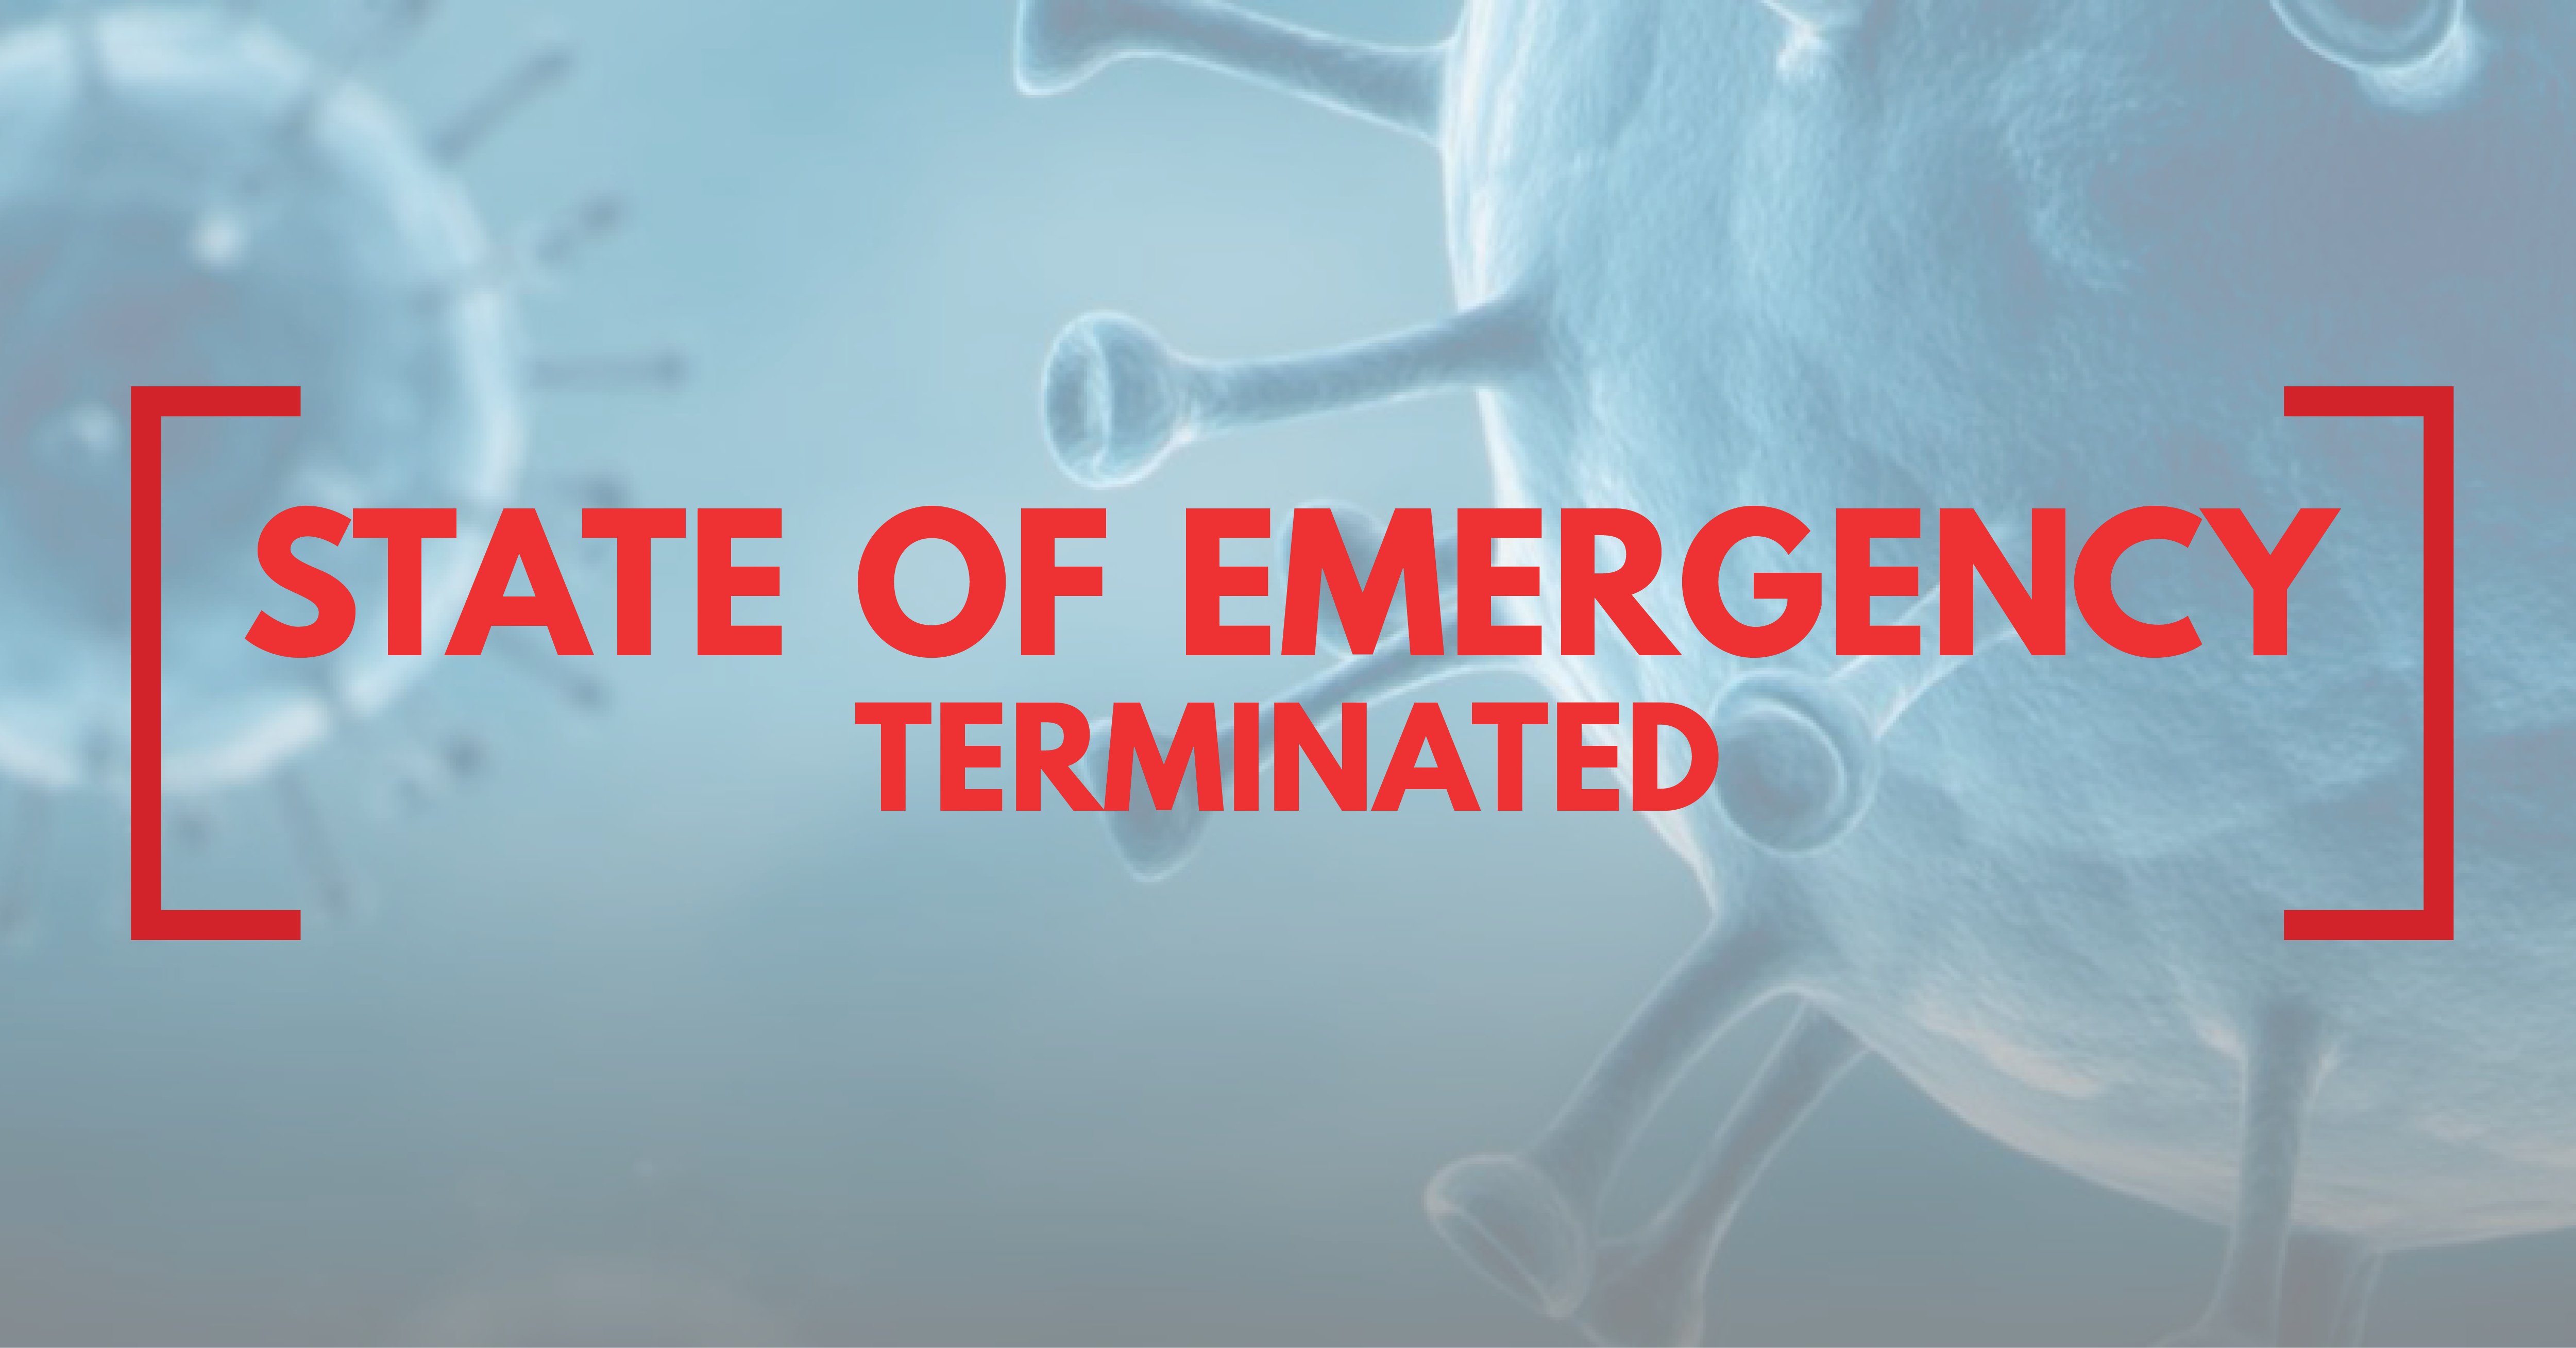 State of emergency terminated